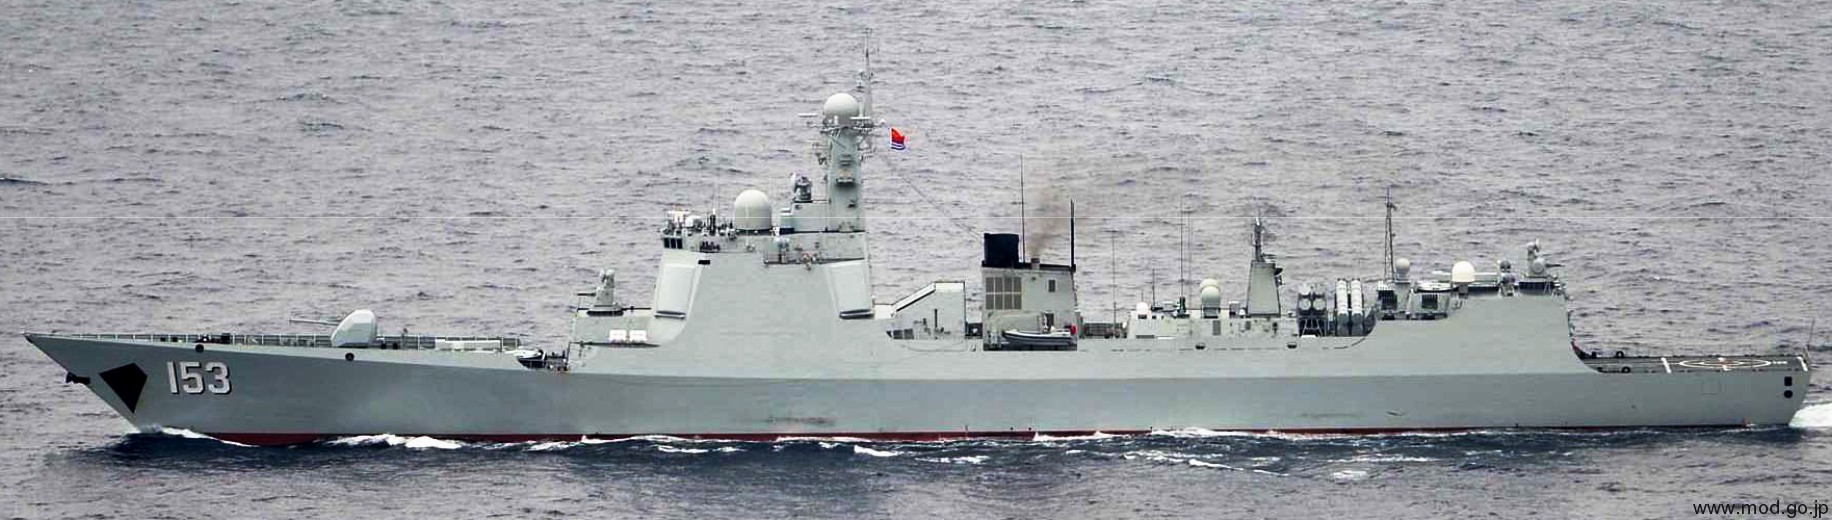 ddg-153 plans xian type 052c class guided missile destroyer china people's liberation army navy 09